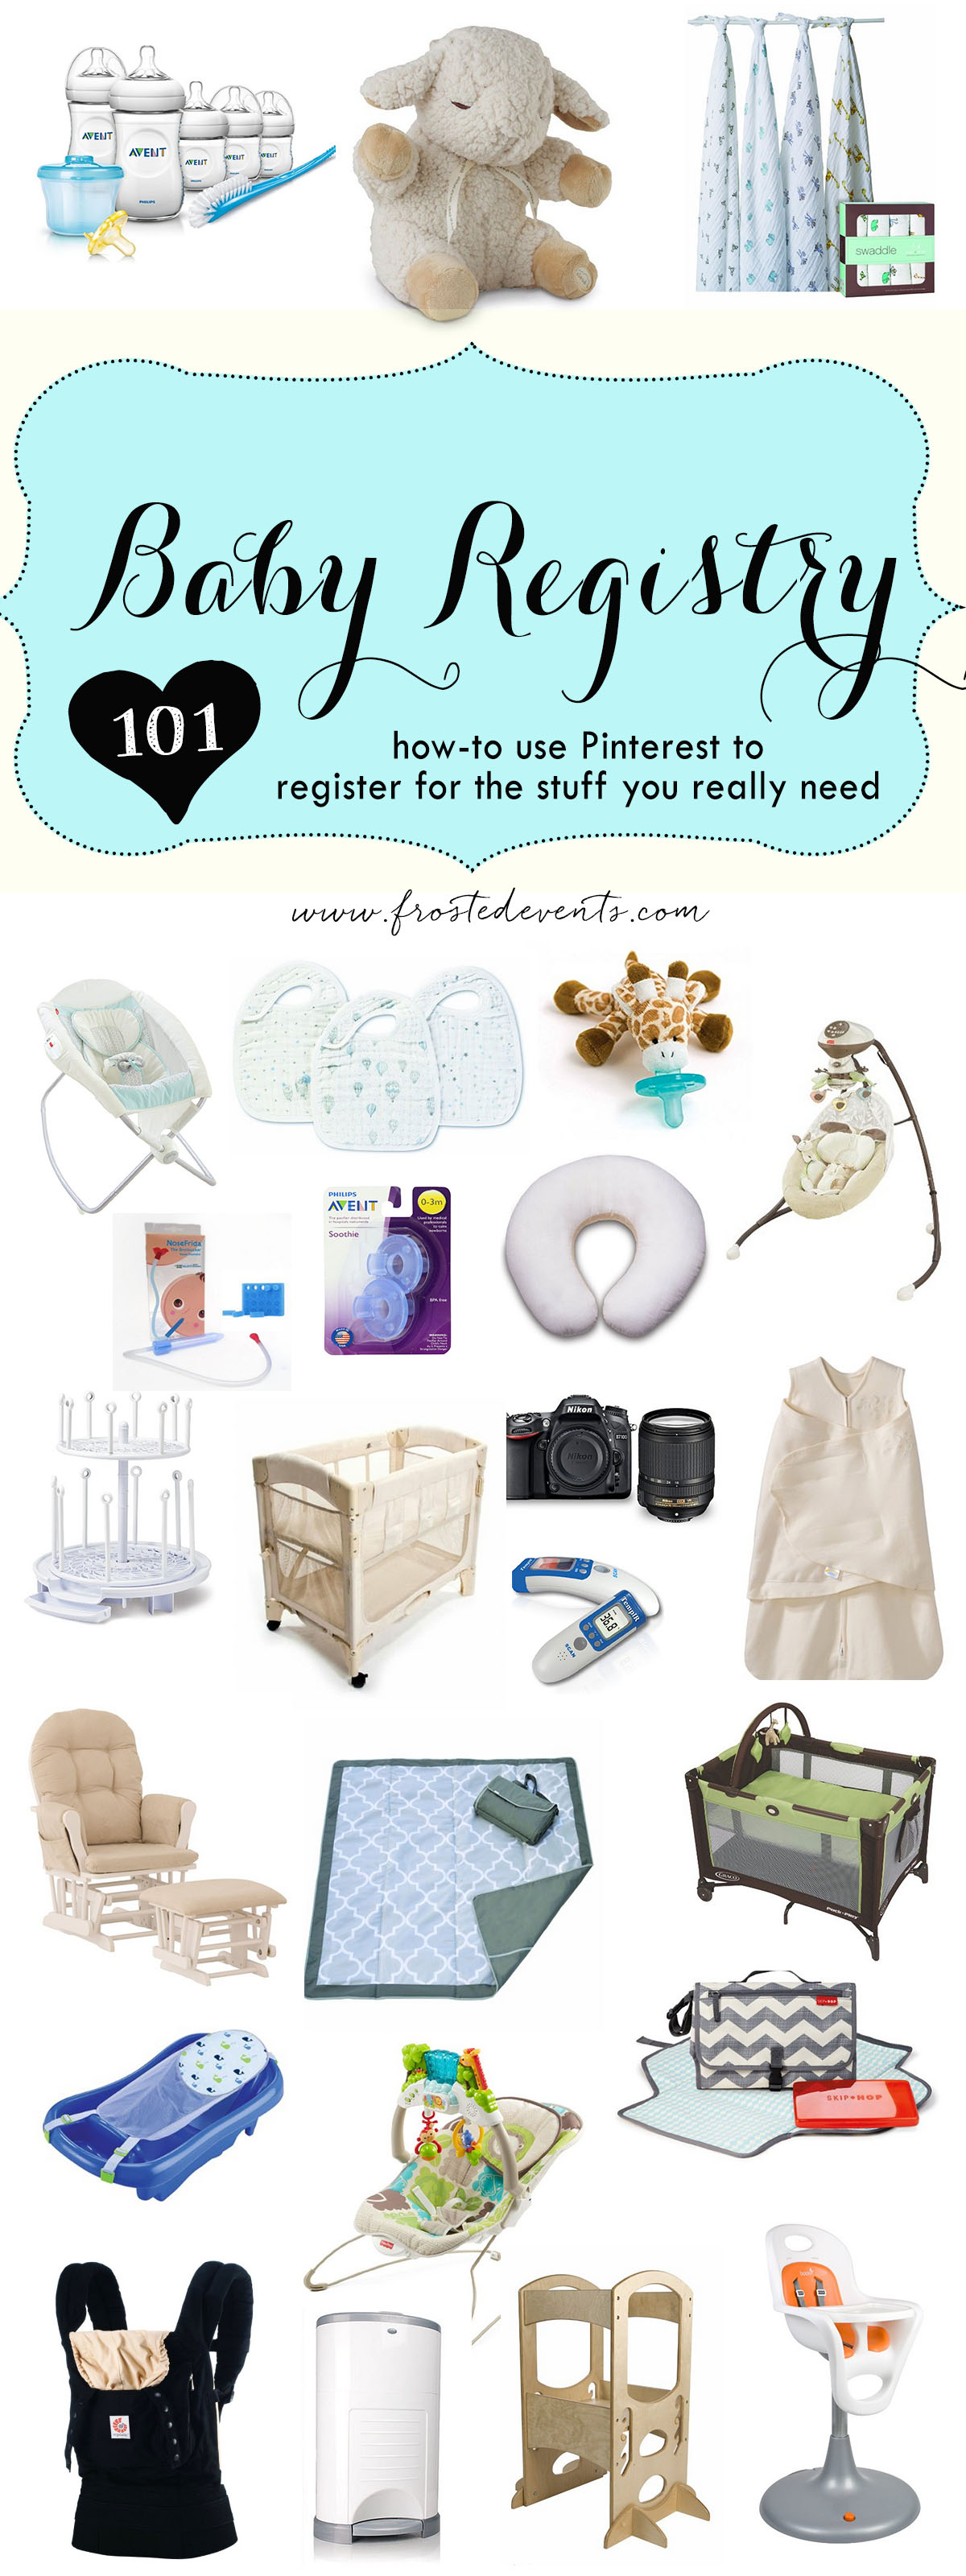 Baby Registry 101| How to Use Pinterest to Register for the Stuff You Really Need